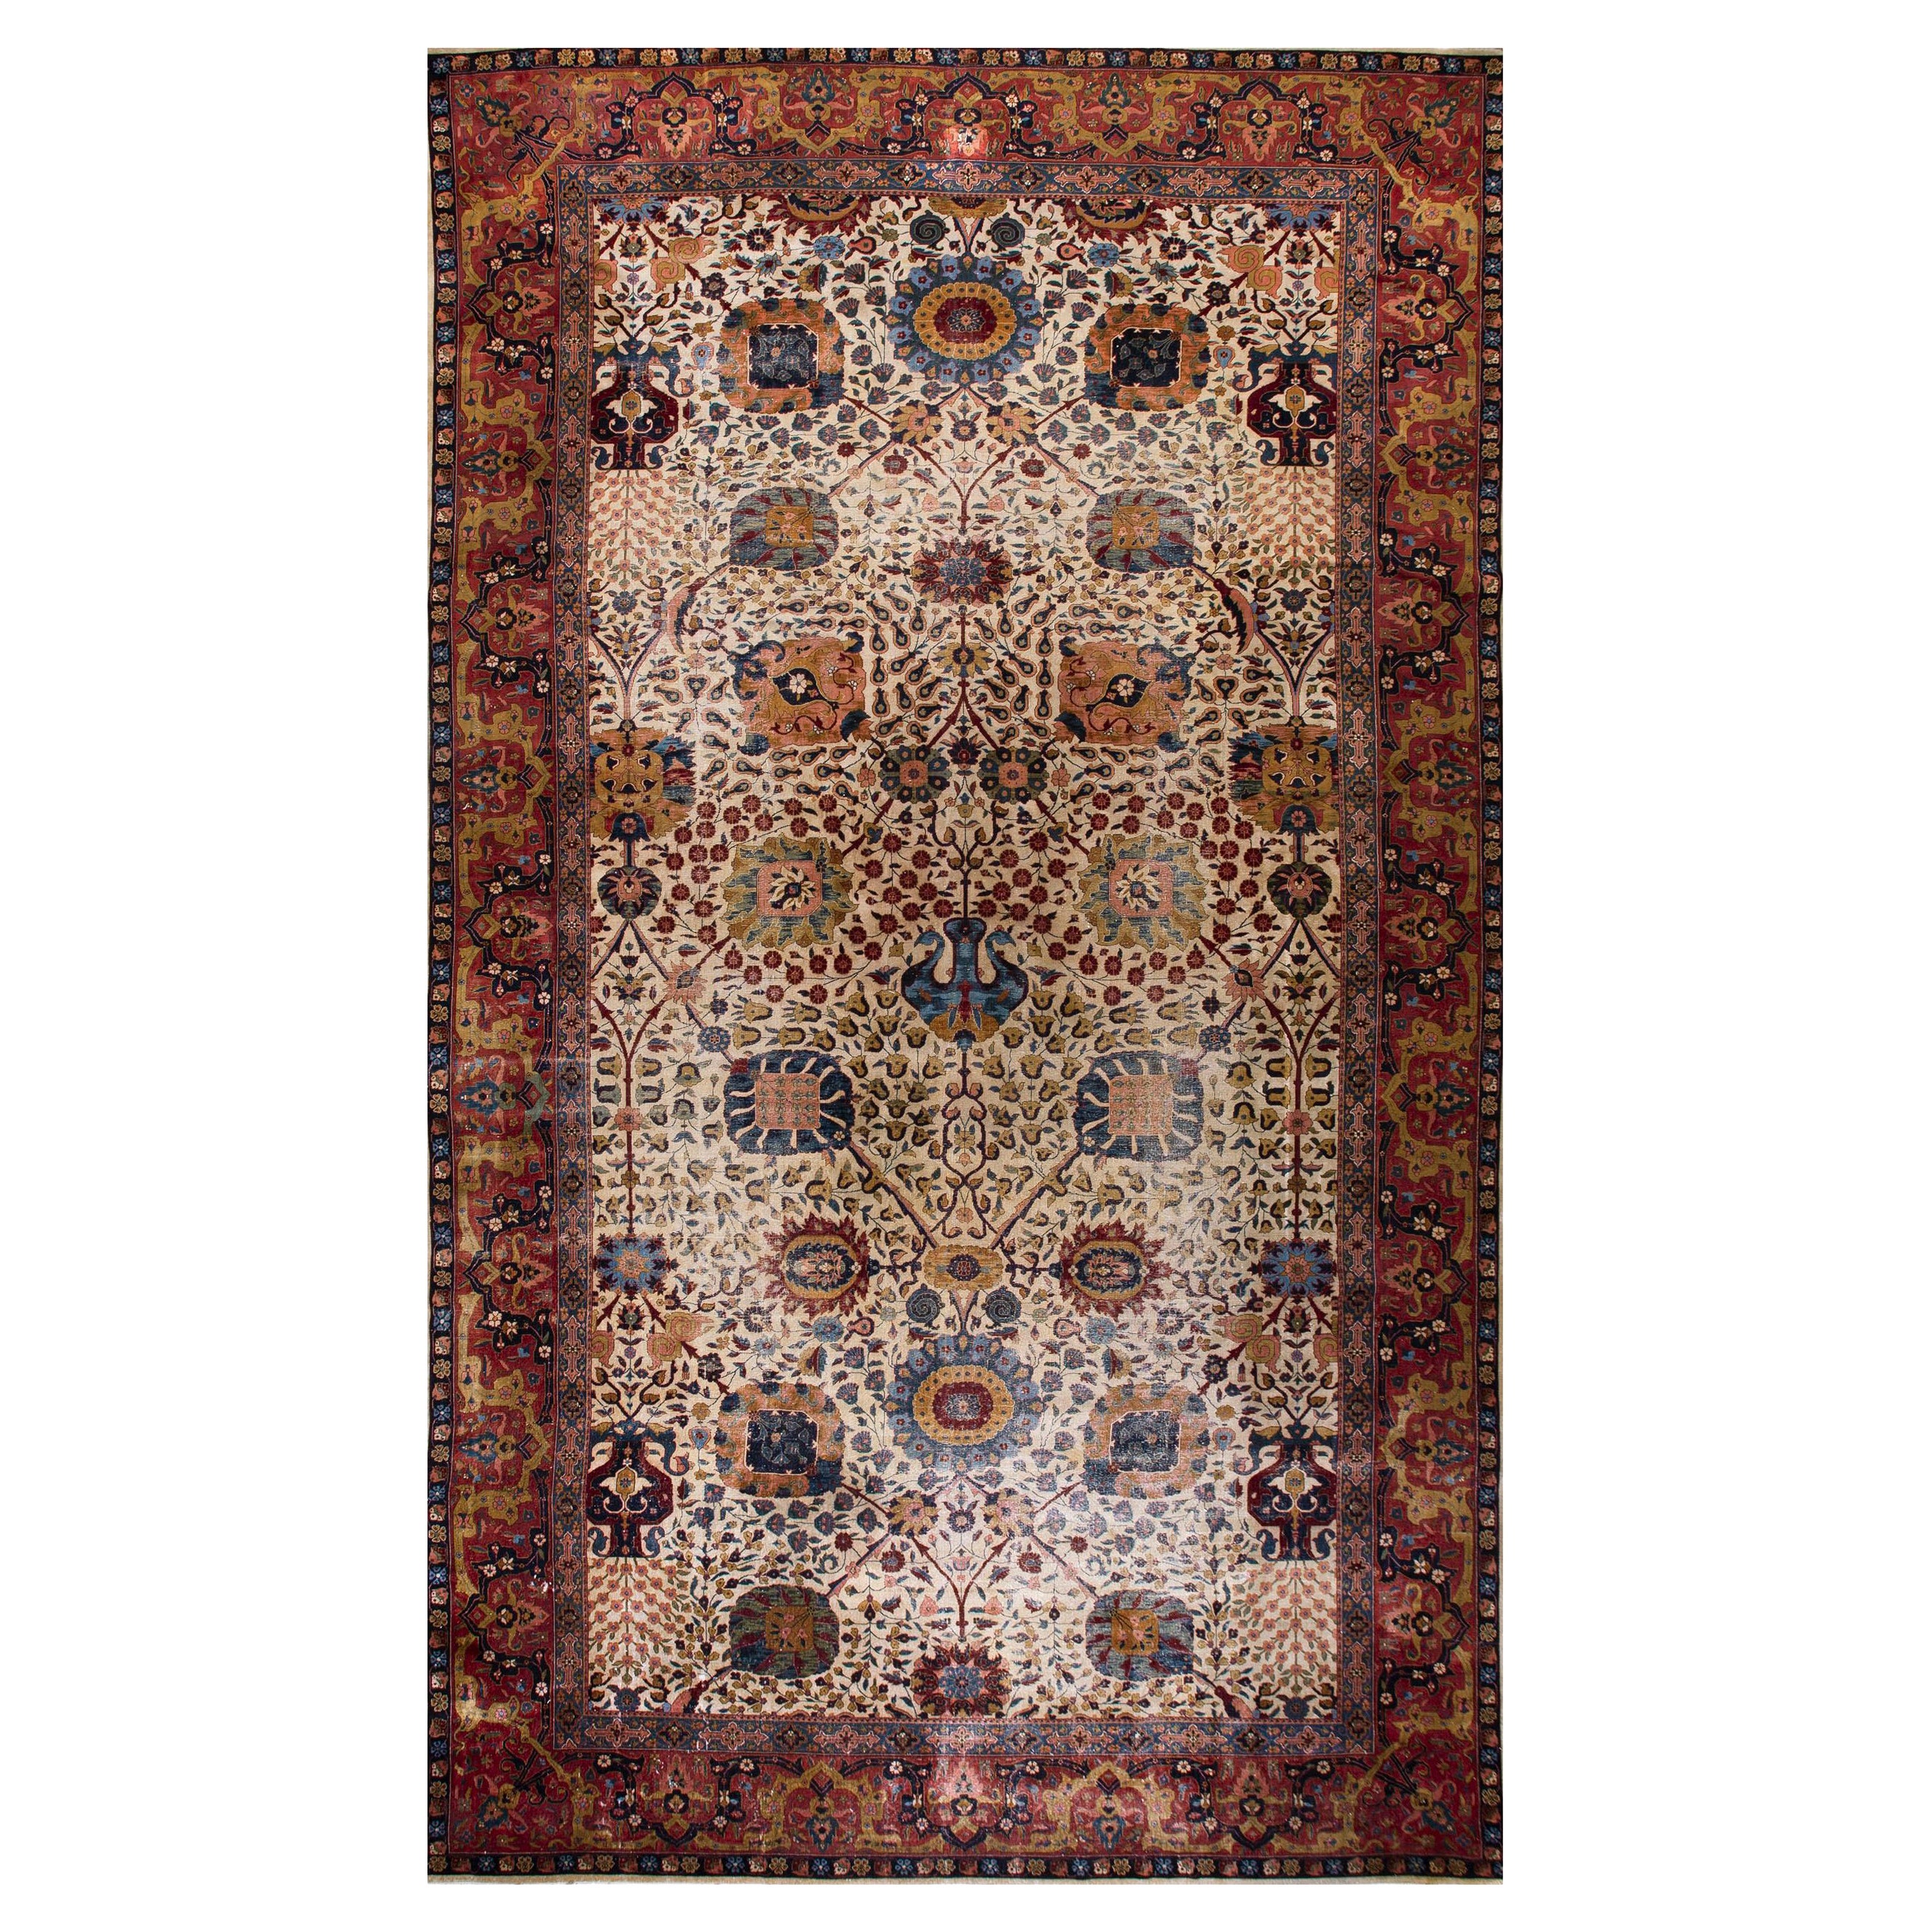 Early 20th Century Indian Lahore Carpet ( 11' x 18'10'' - 335 x 575 ) For Sale